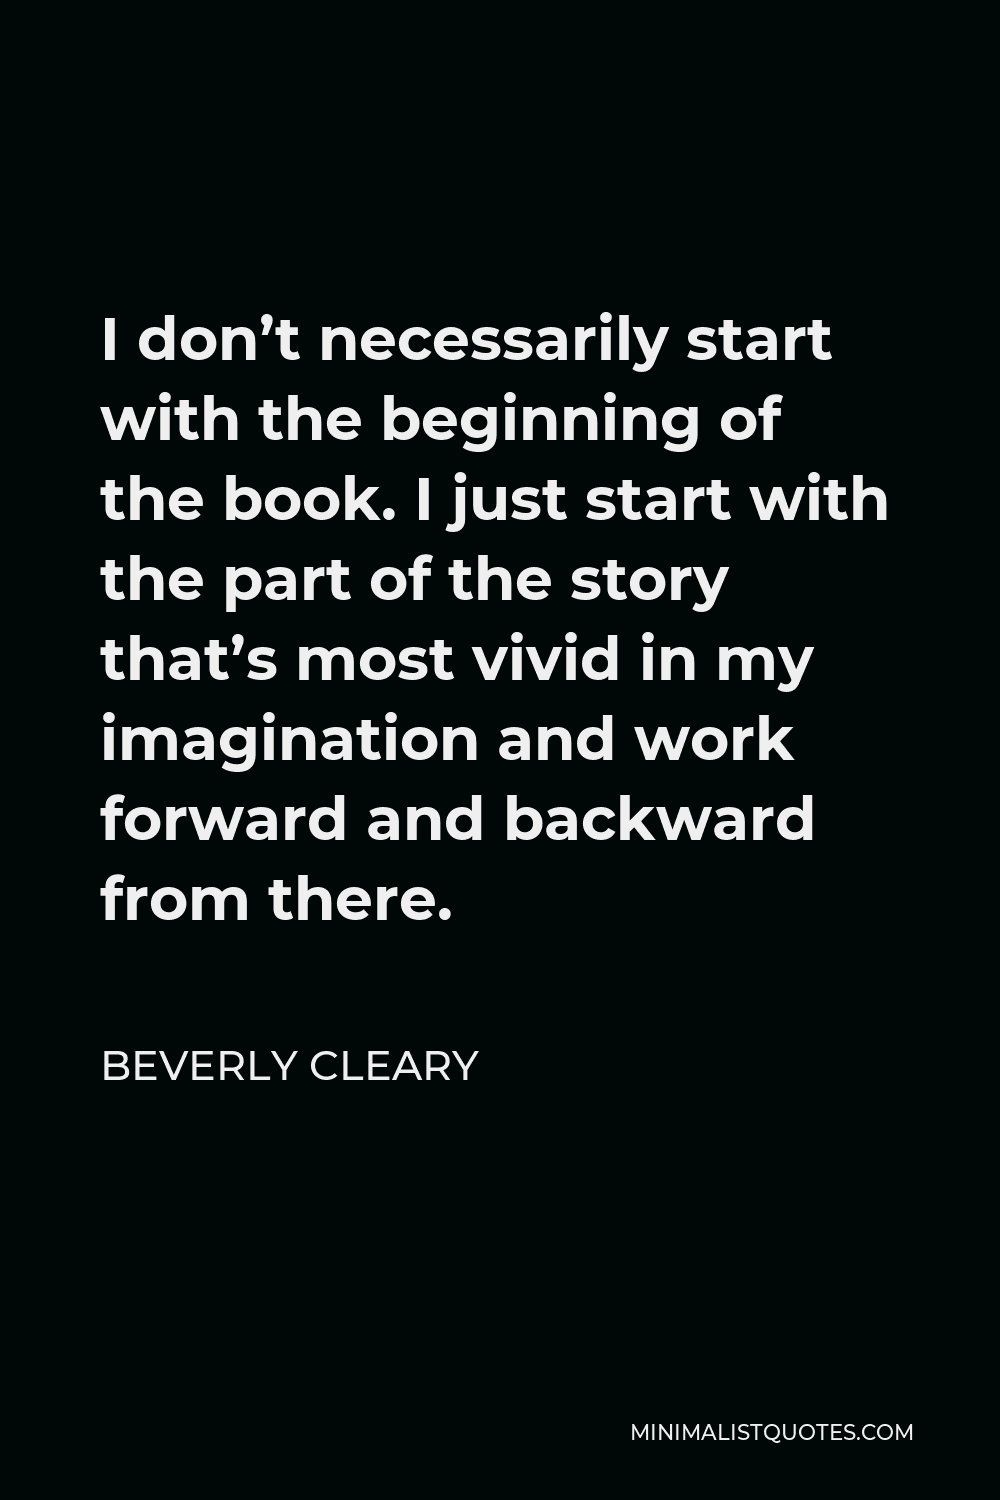 Beverly Cleary Quote - I don’t necessarily start with the beginning of the book. I just start with the part of the story that’s most vivid in my imagination and work forward and backward from there.